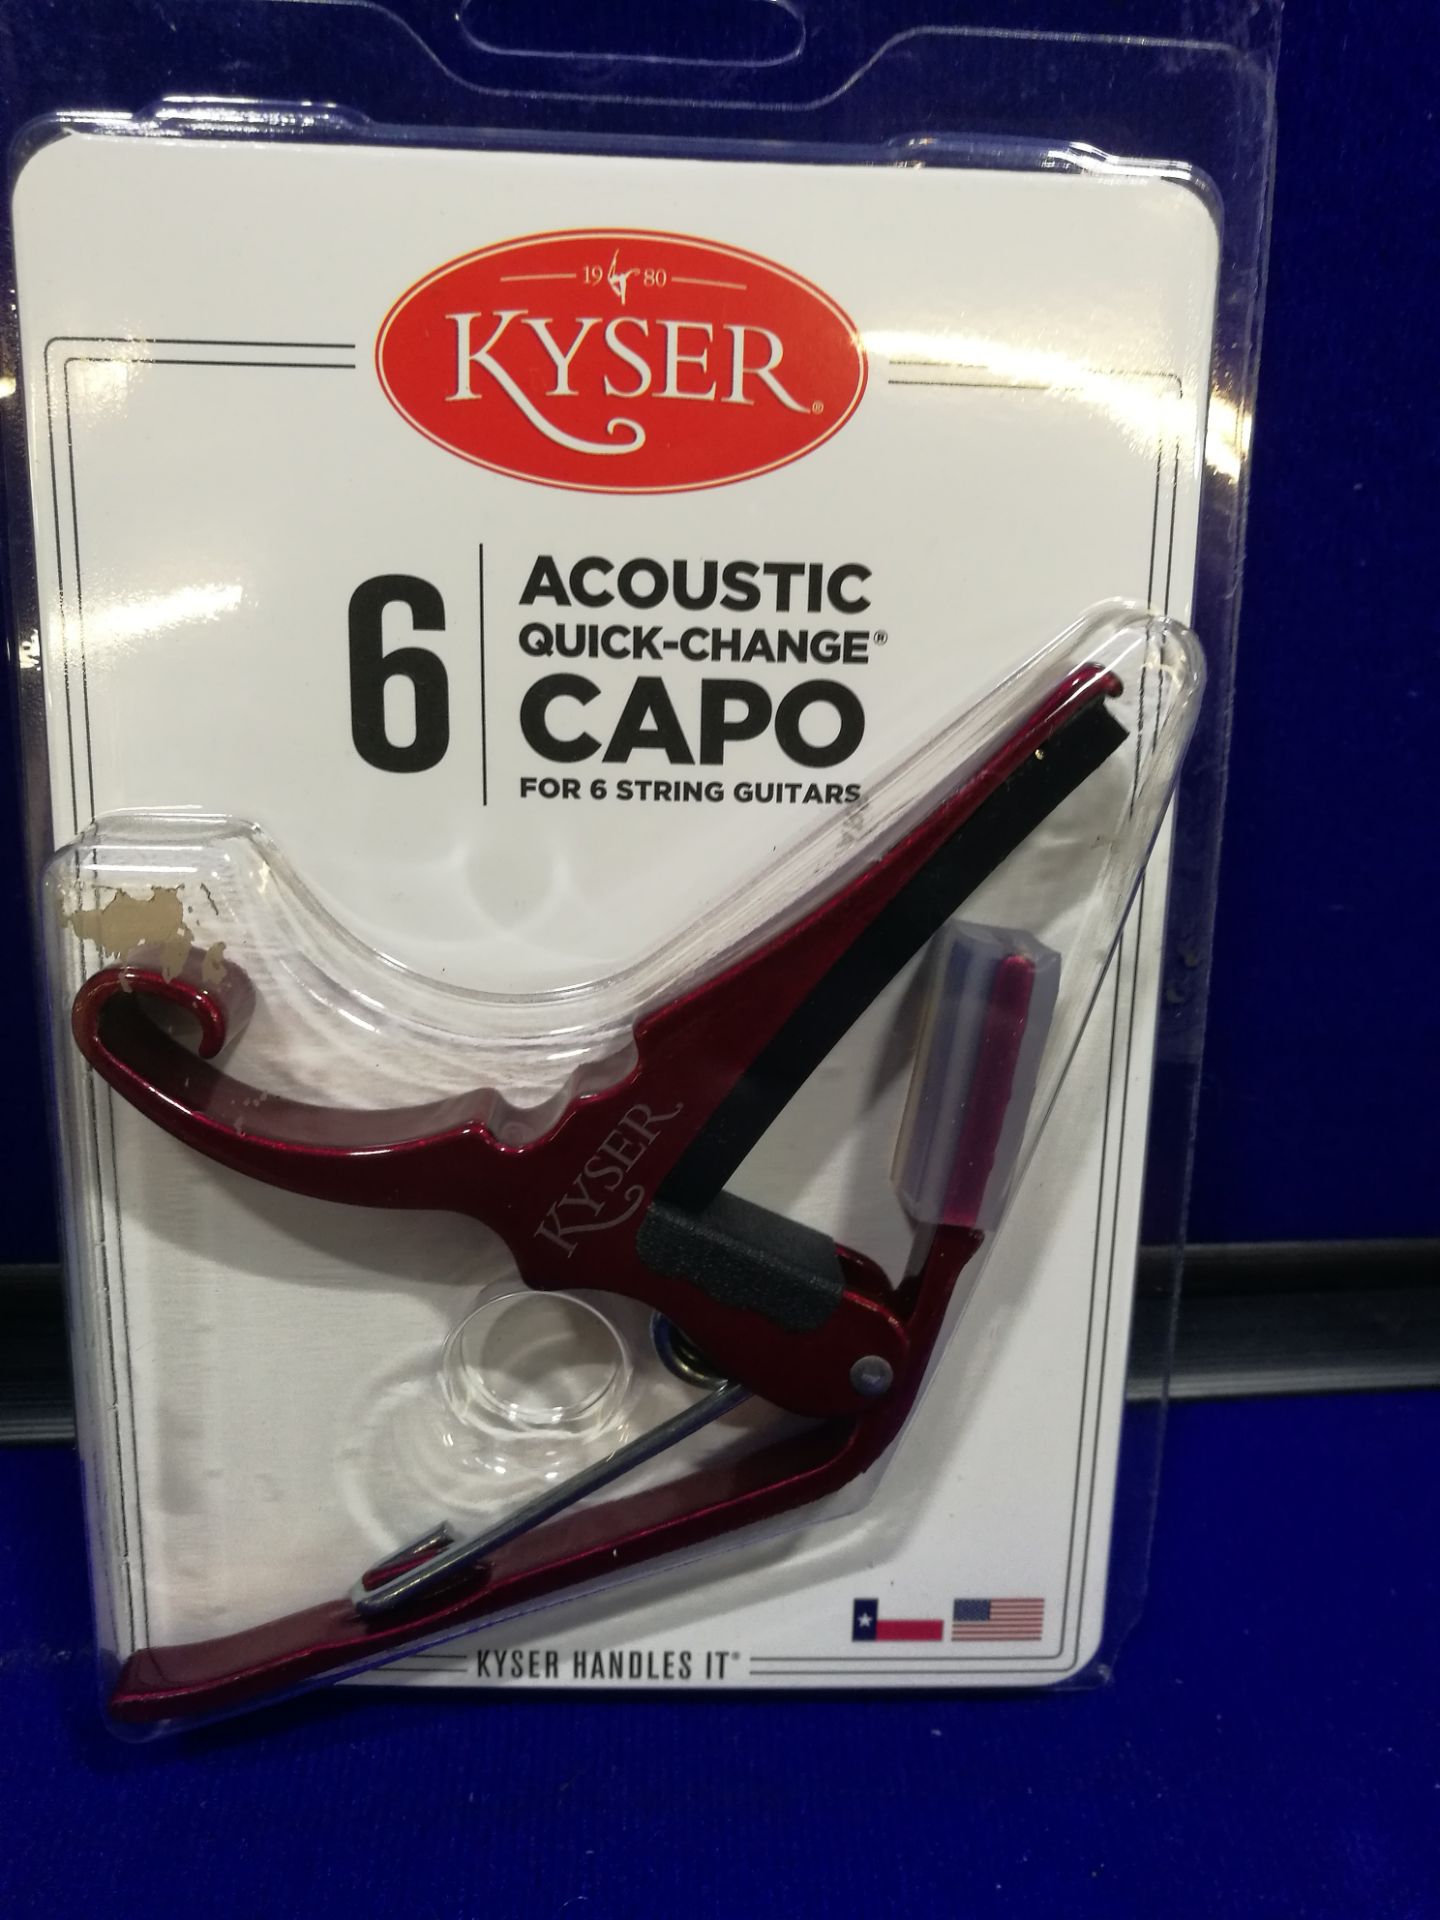 Kyser Quick Change Capo - Acoustic, Red - KG6RA